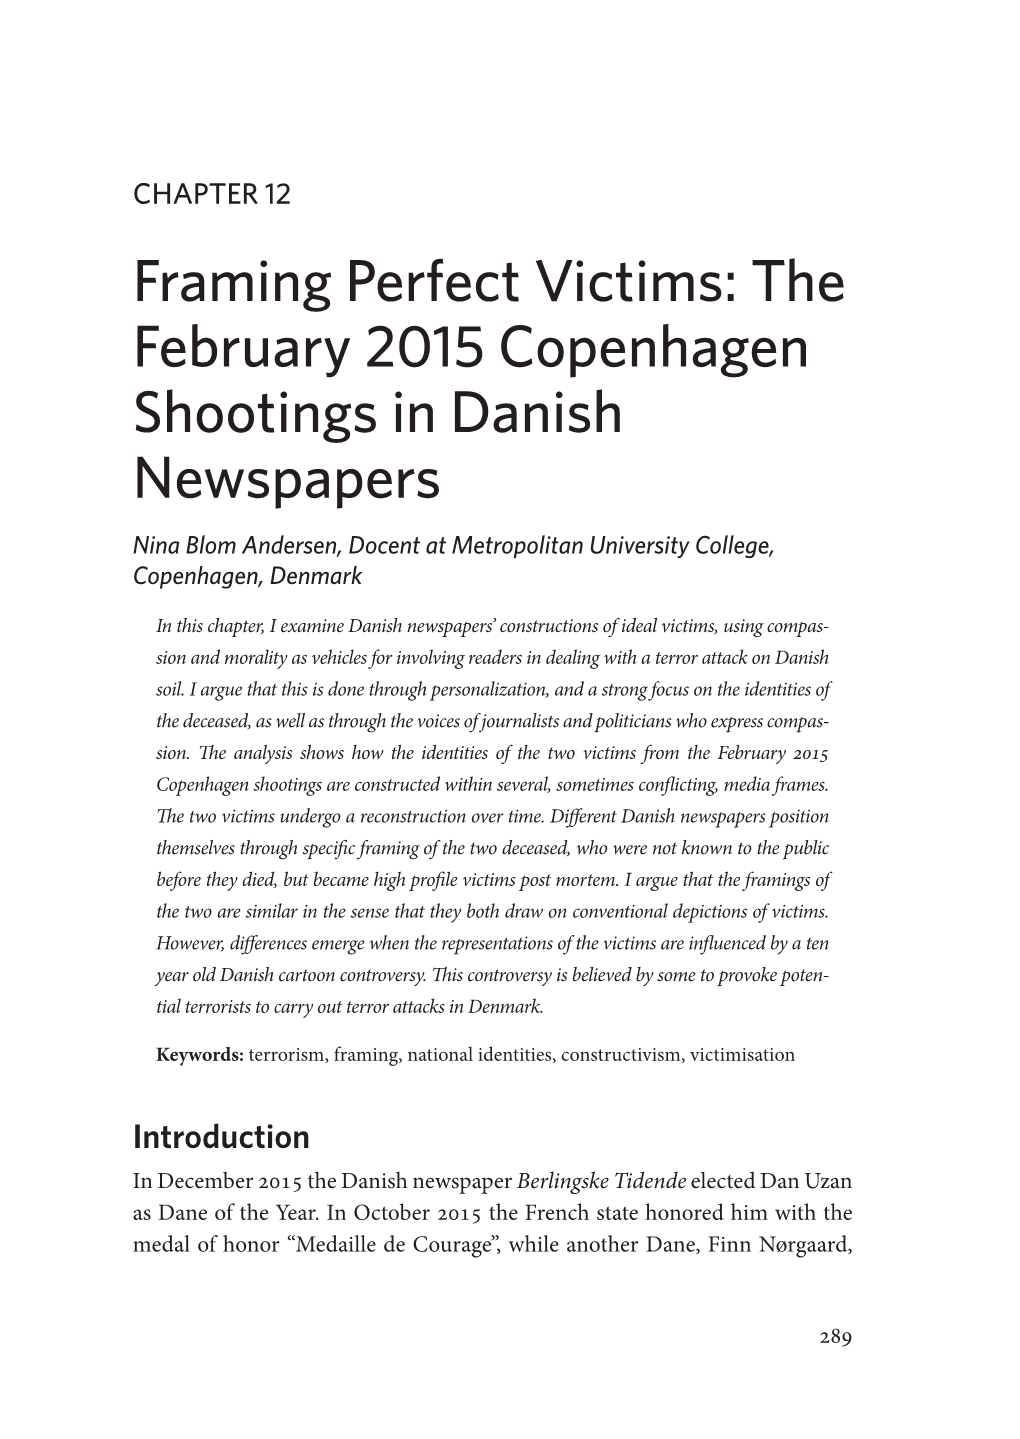 Framing Perfect Victims: the February 2015 Copenhagen Shootings In